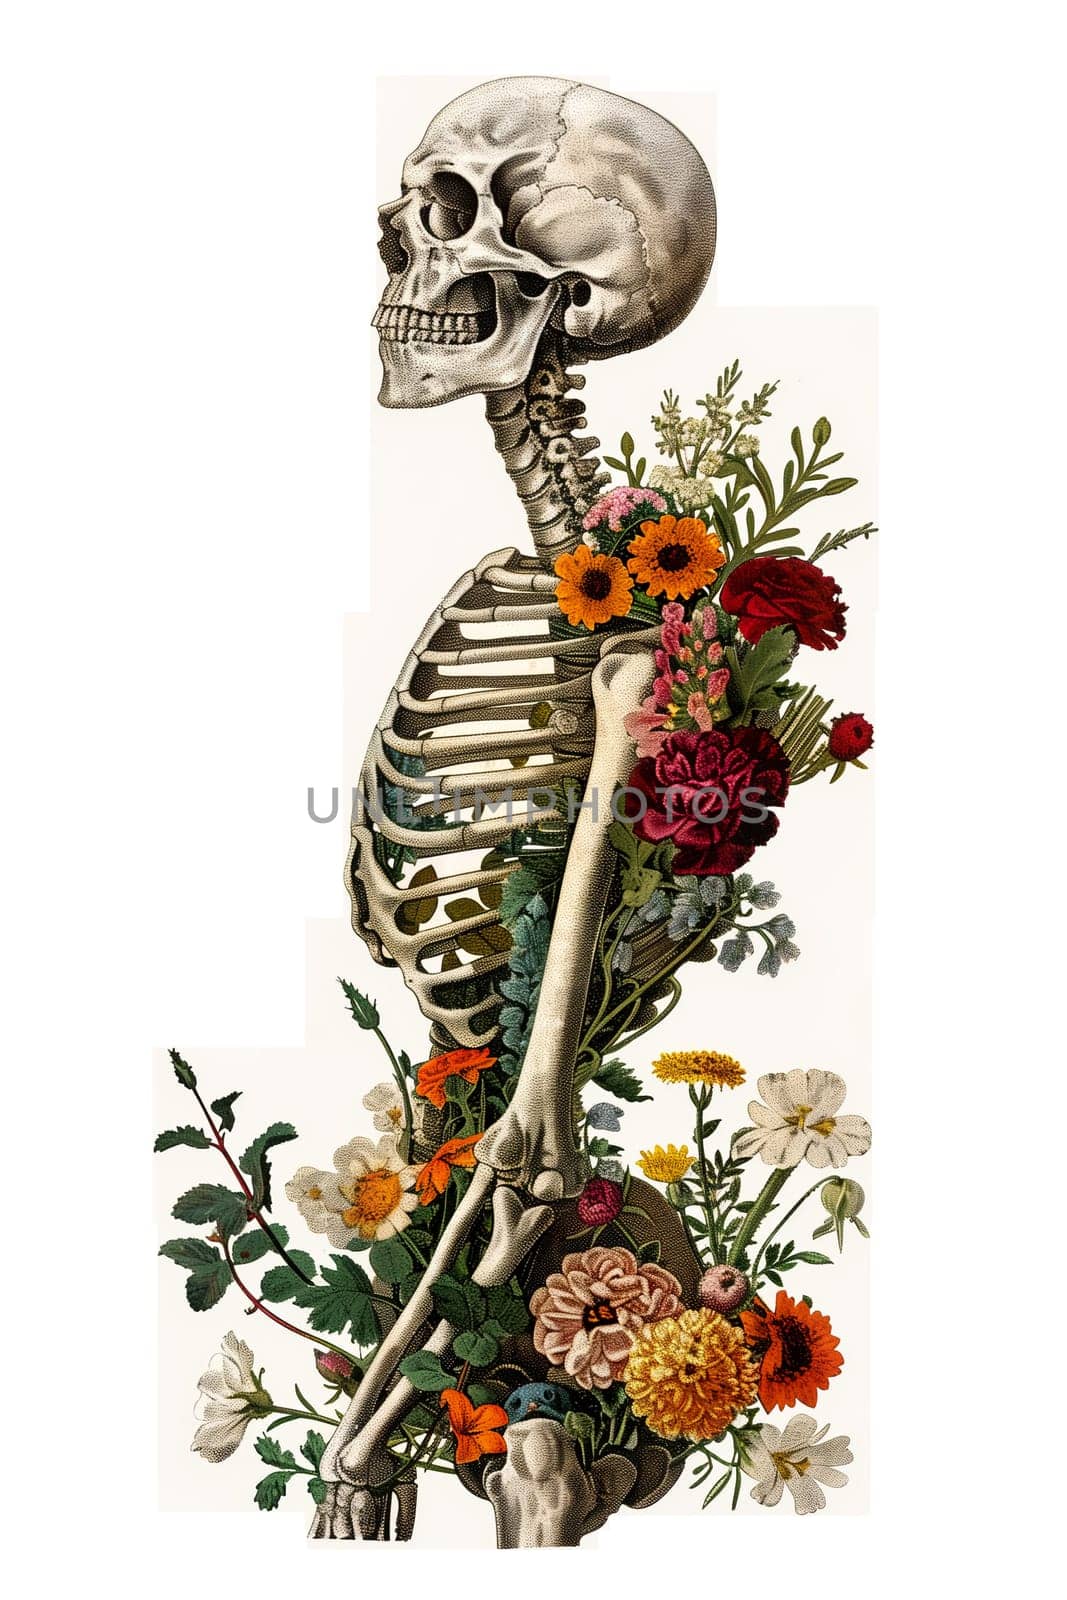 Vintage Illustration of skeleton with flowers side view by Dustick